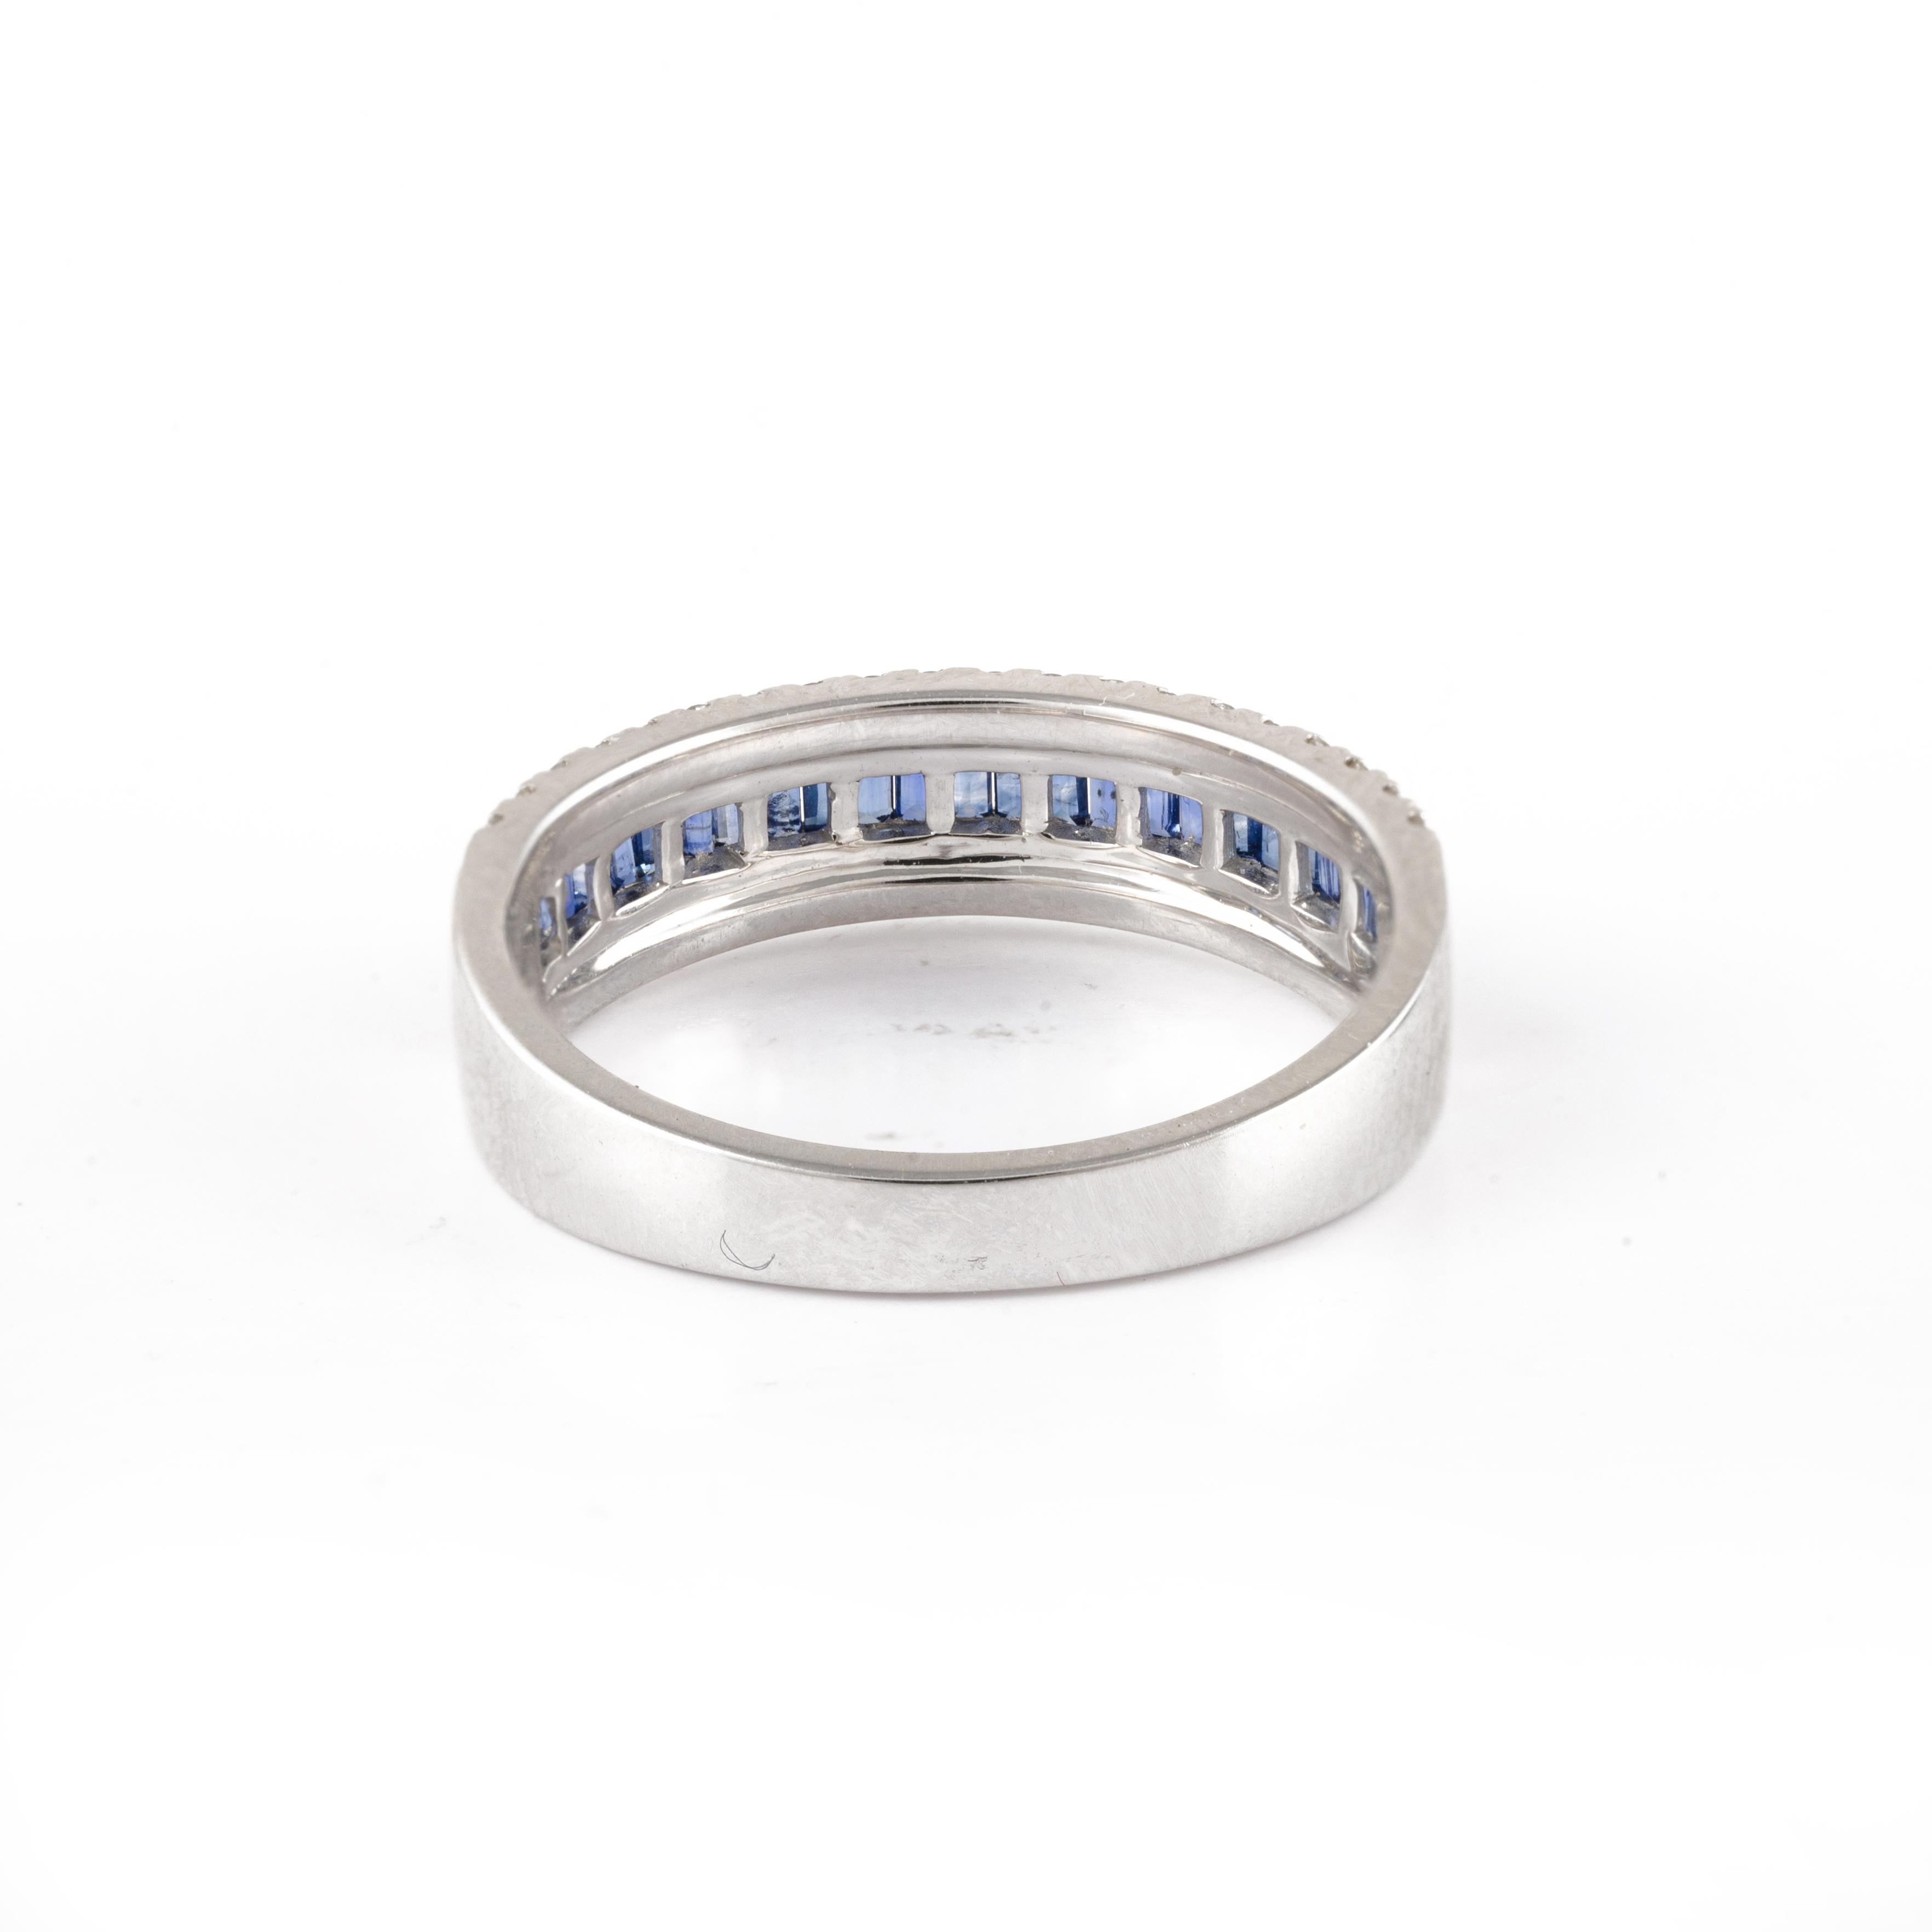 For Sale:  Natural Blue Sapphire Diamond Wedding Ring Crafted in 18k Solid White Gold 2